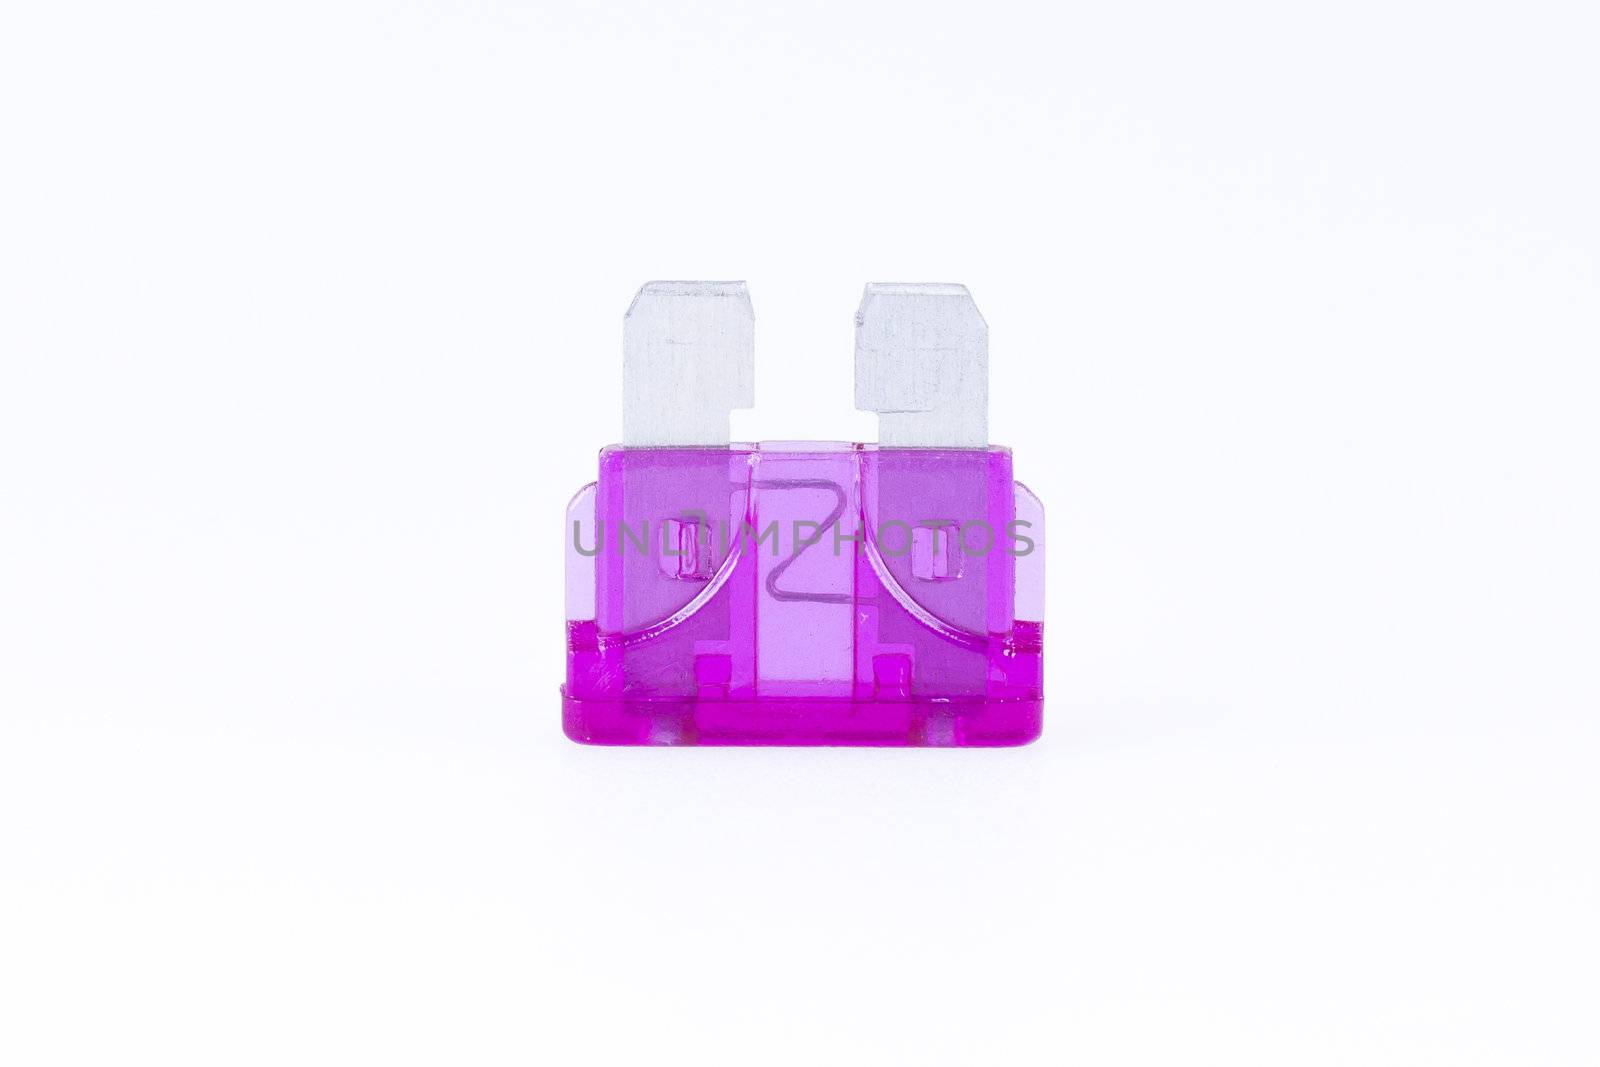 A purple car fuse with a white background